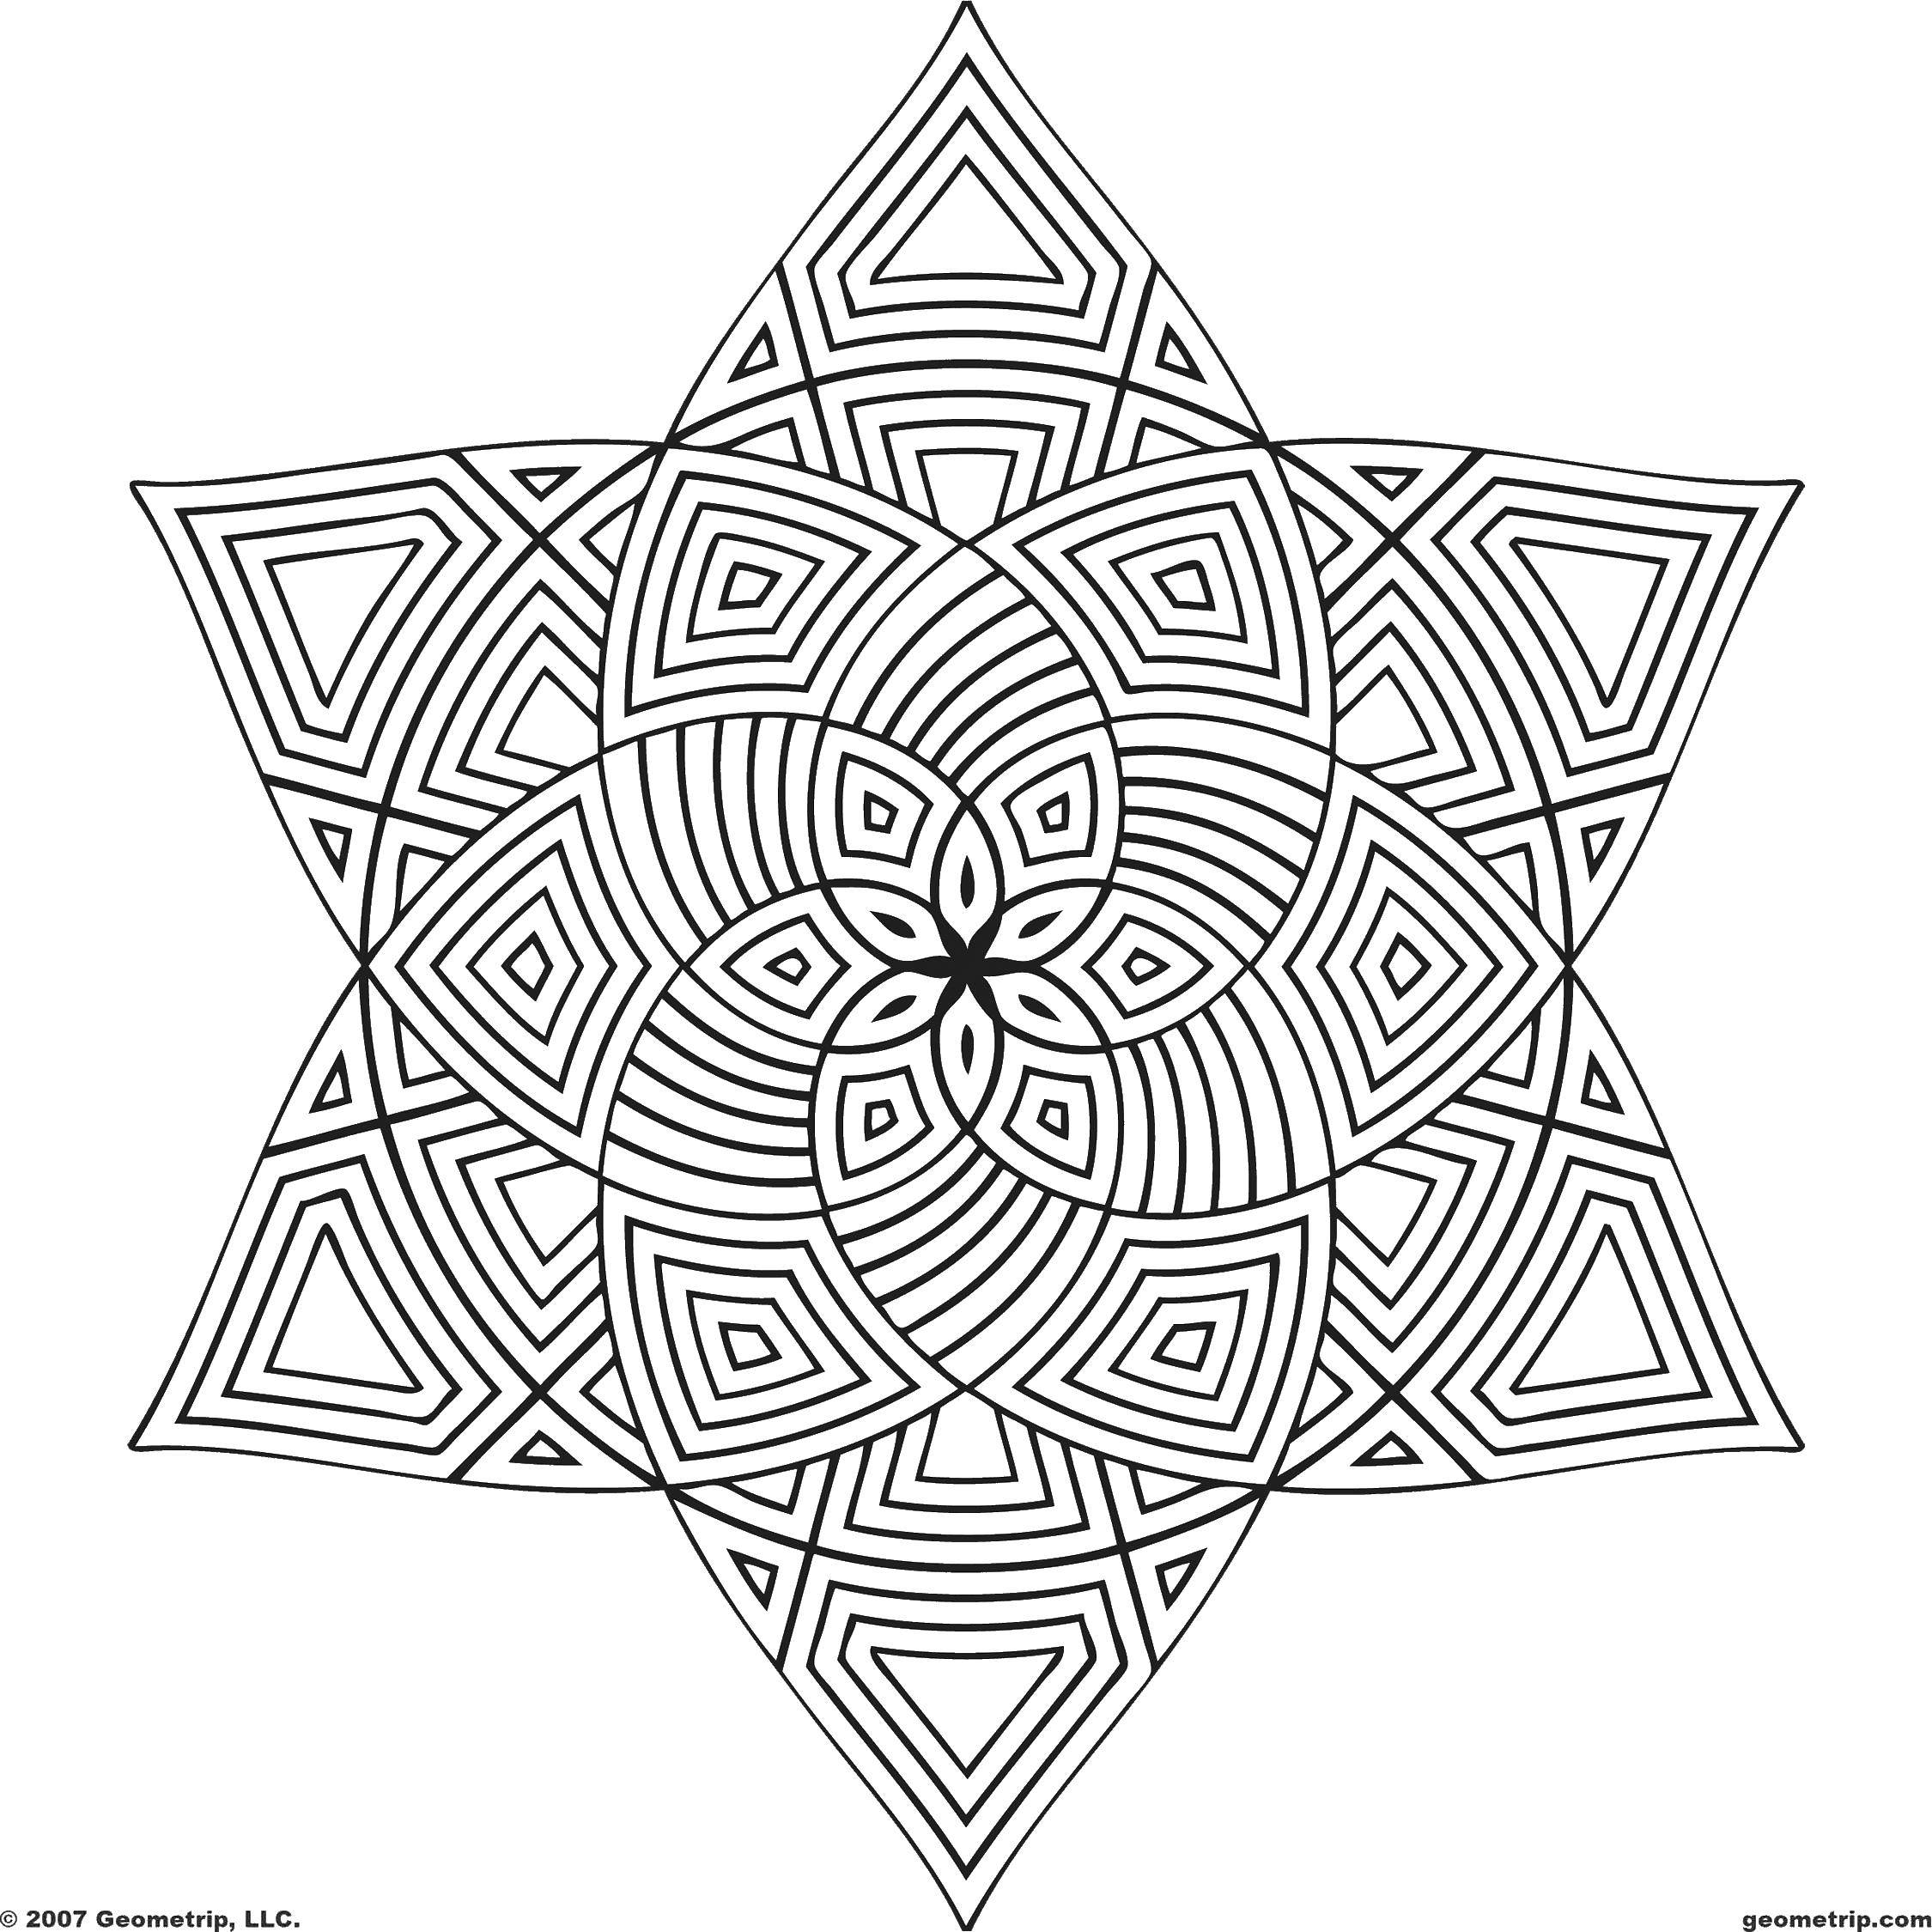 Coloring Geometric flower. Category Patterns with flowers. Tags:  Patterns, flower.